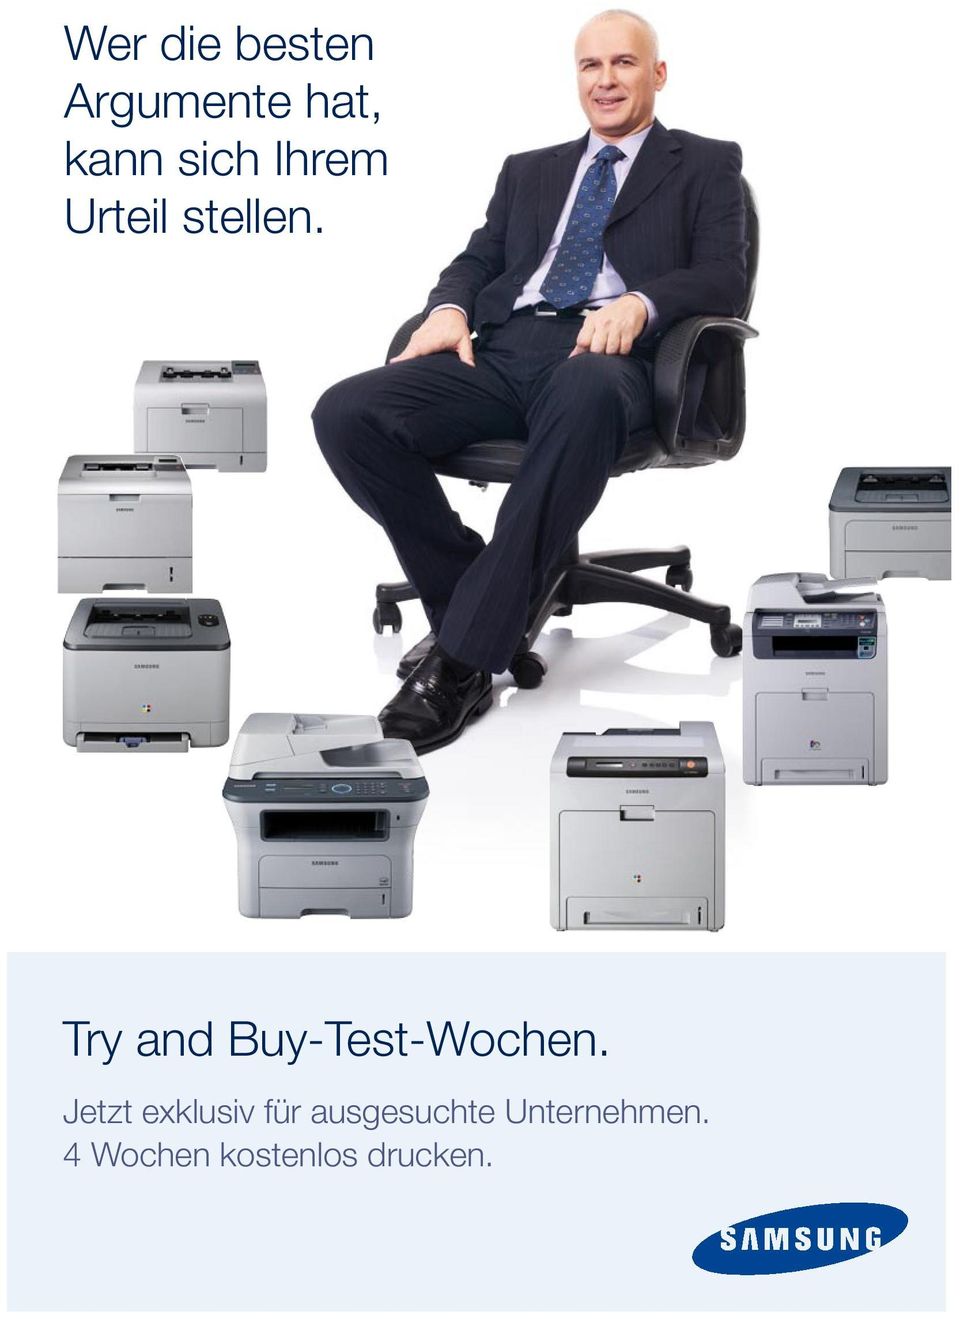 Try and Buy-Test-Wochen.